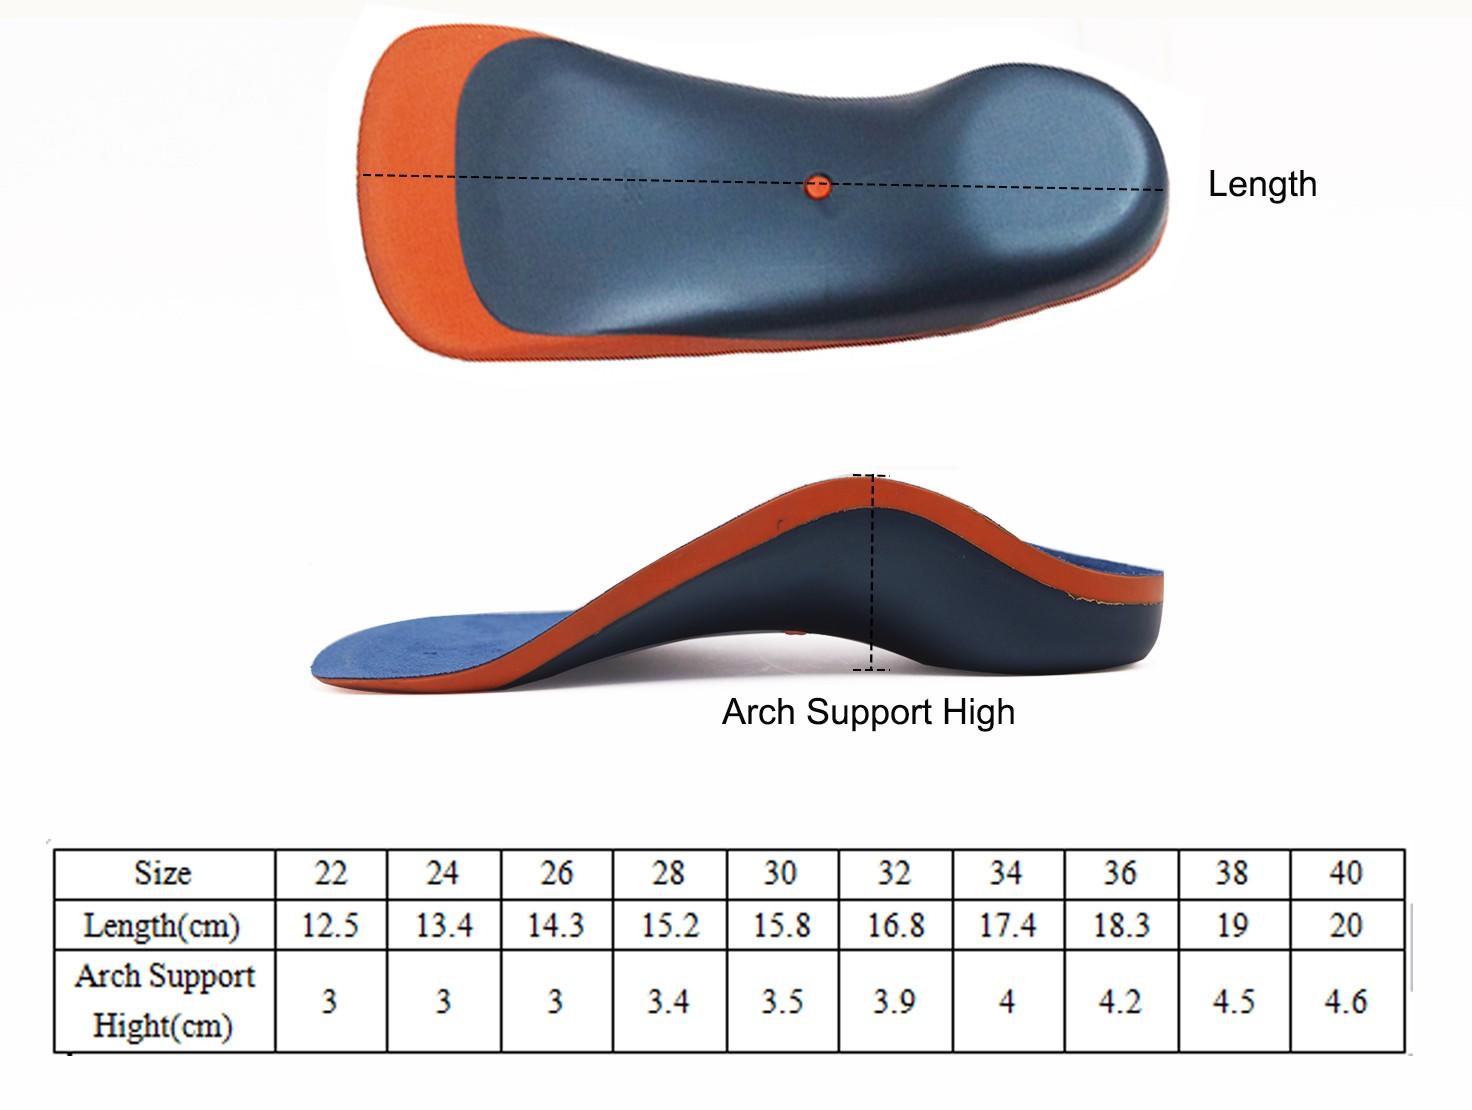 S-King-High Arch Support Kid Orthotics Insoles For Flat Foot Plantar Fasciitis